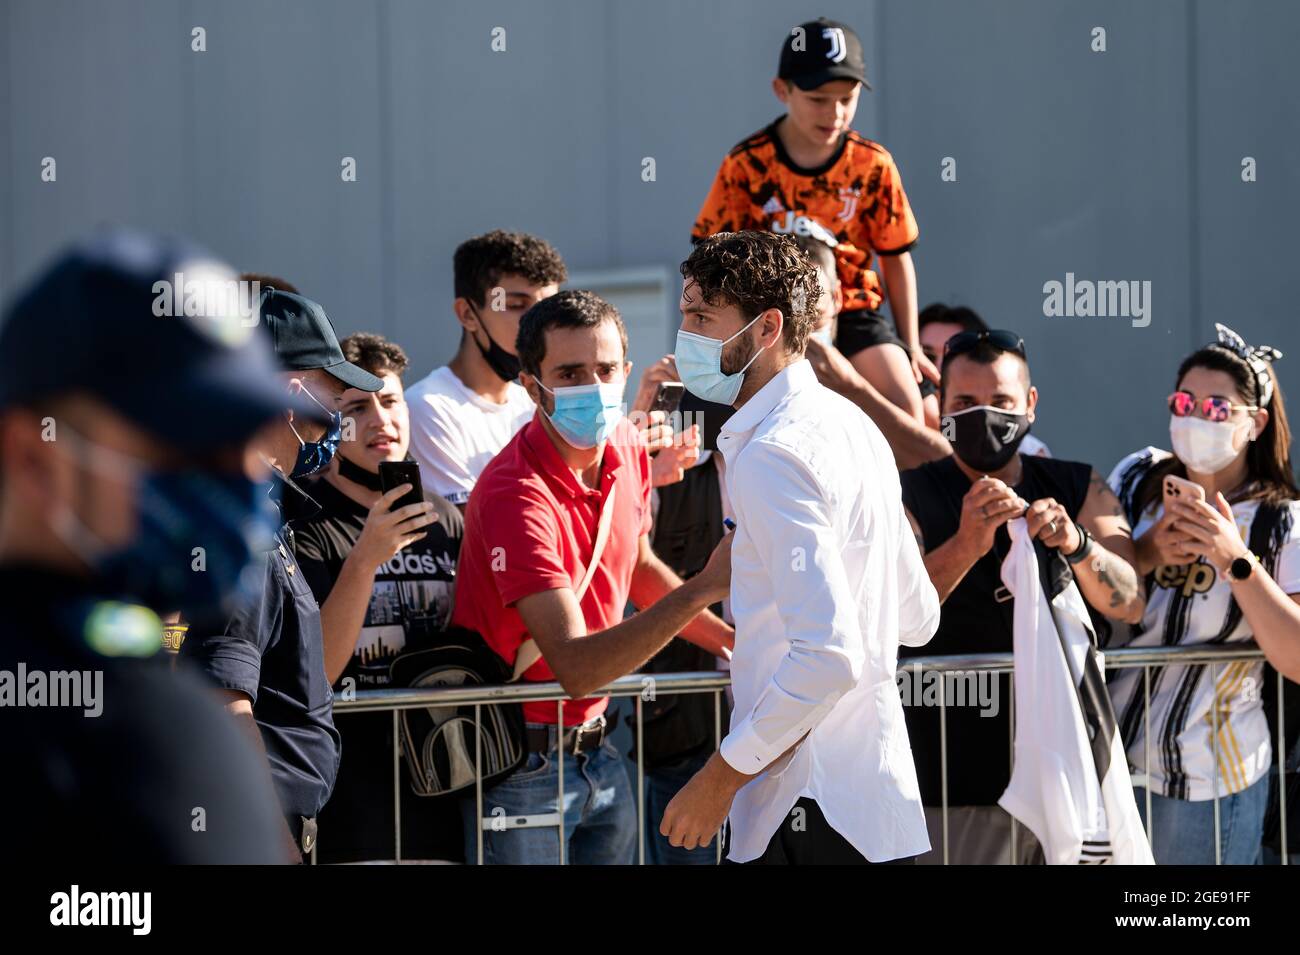 Turin, Italy. 18 August 2021. Juventus FC new signing Manuel Locatelli is welcomed by fans prior to undergoing medical check. Credit: Nicolò Campo/Alamy Live News Stock Photo